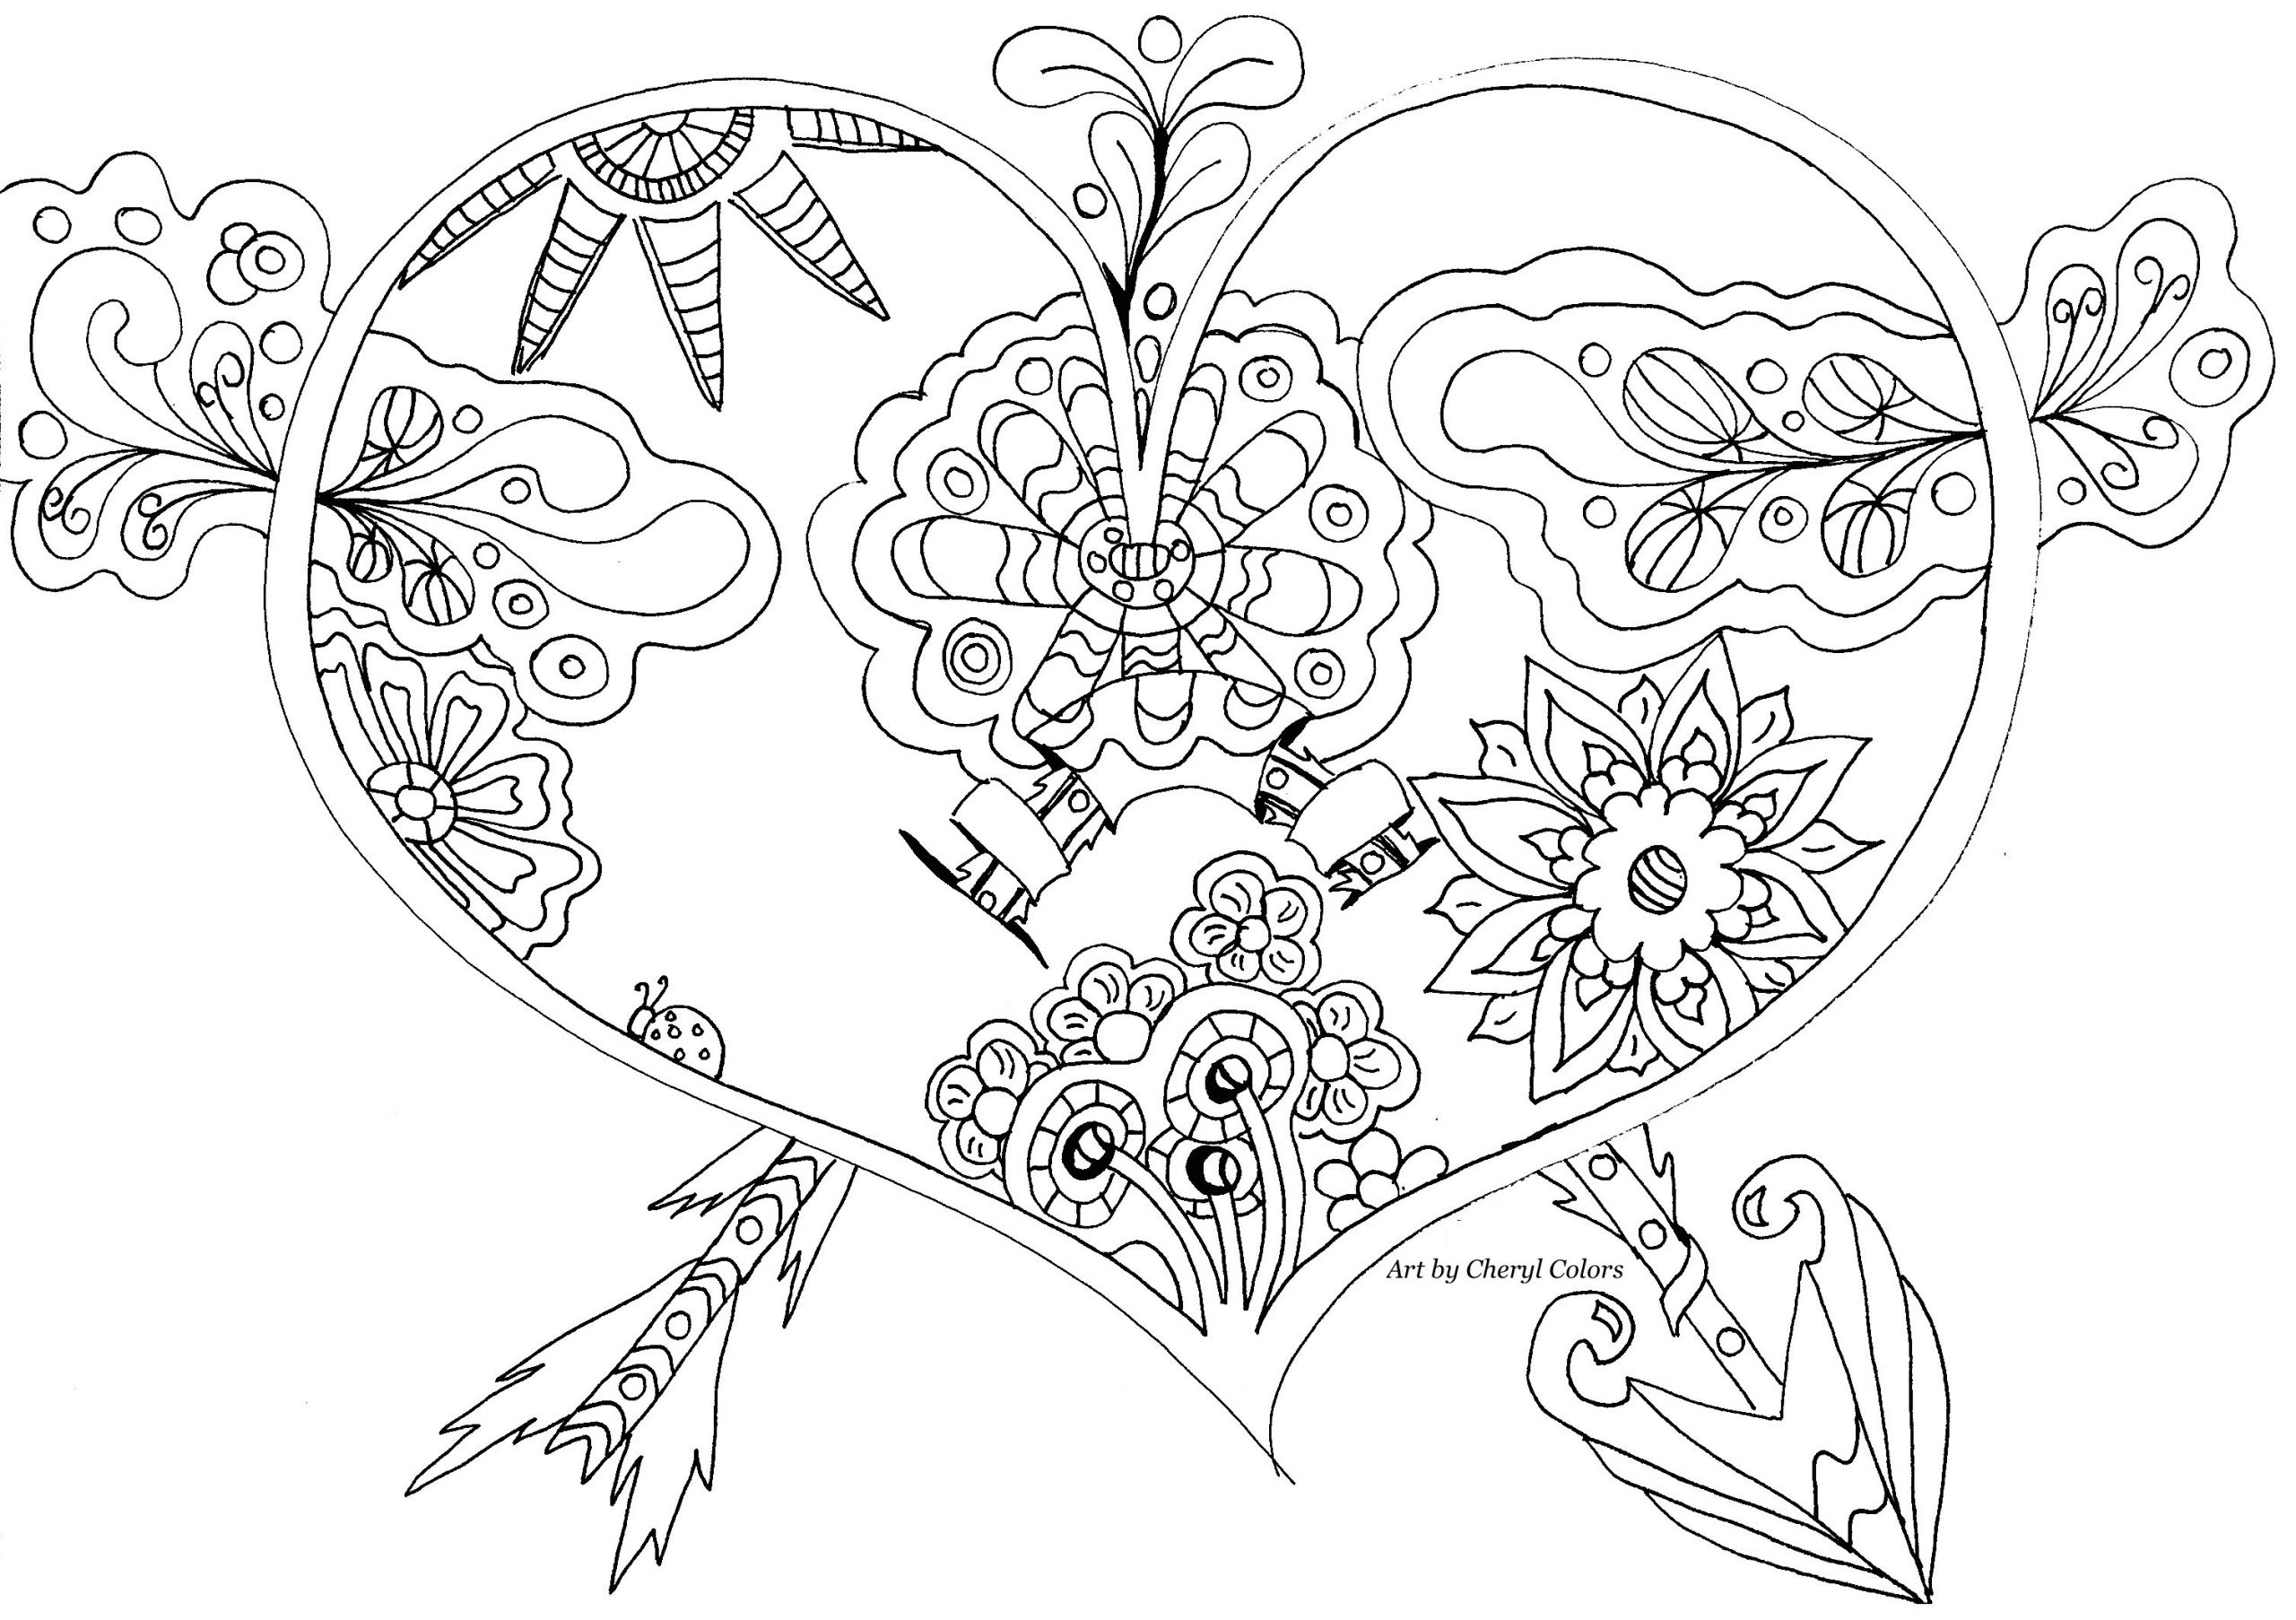 Coloring Book Adults
 FREE Coloring Pages – Adult Coloring Worldwide